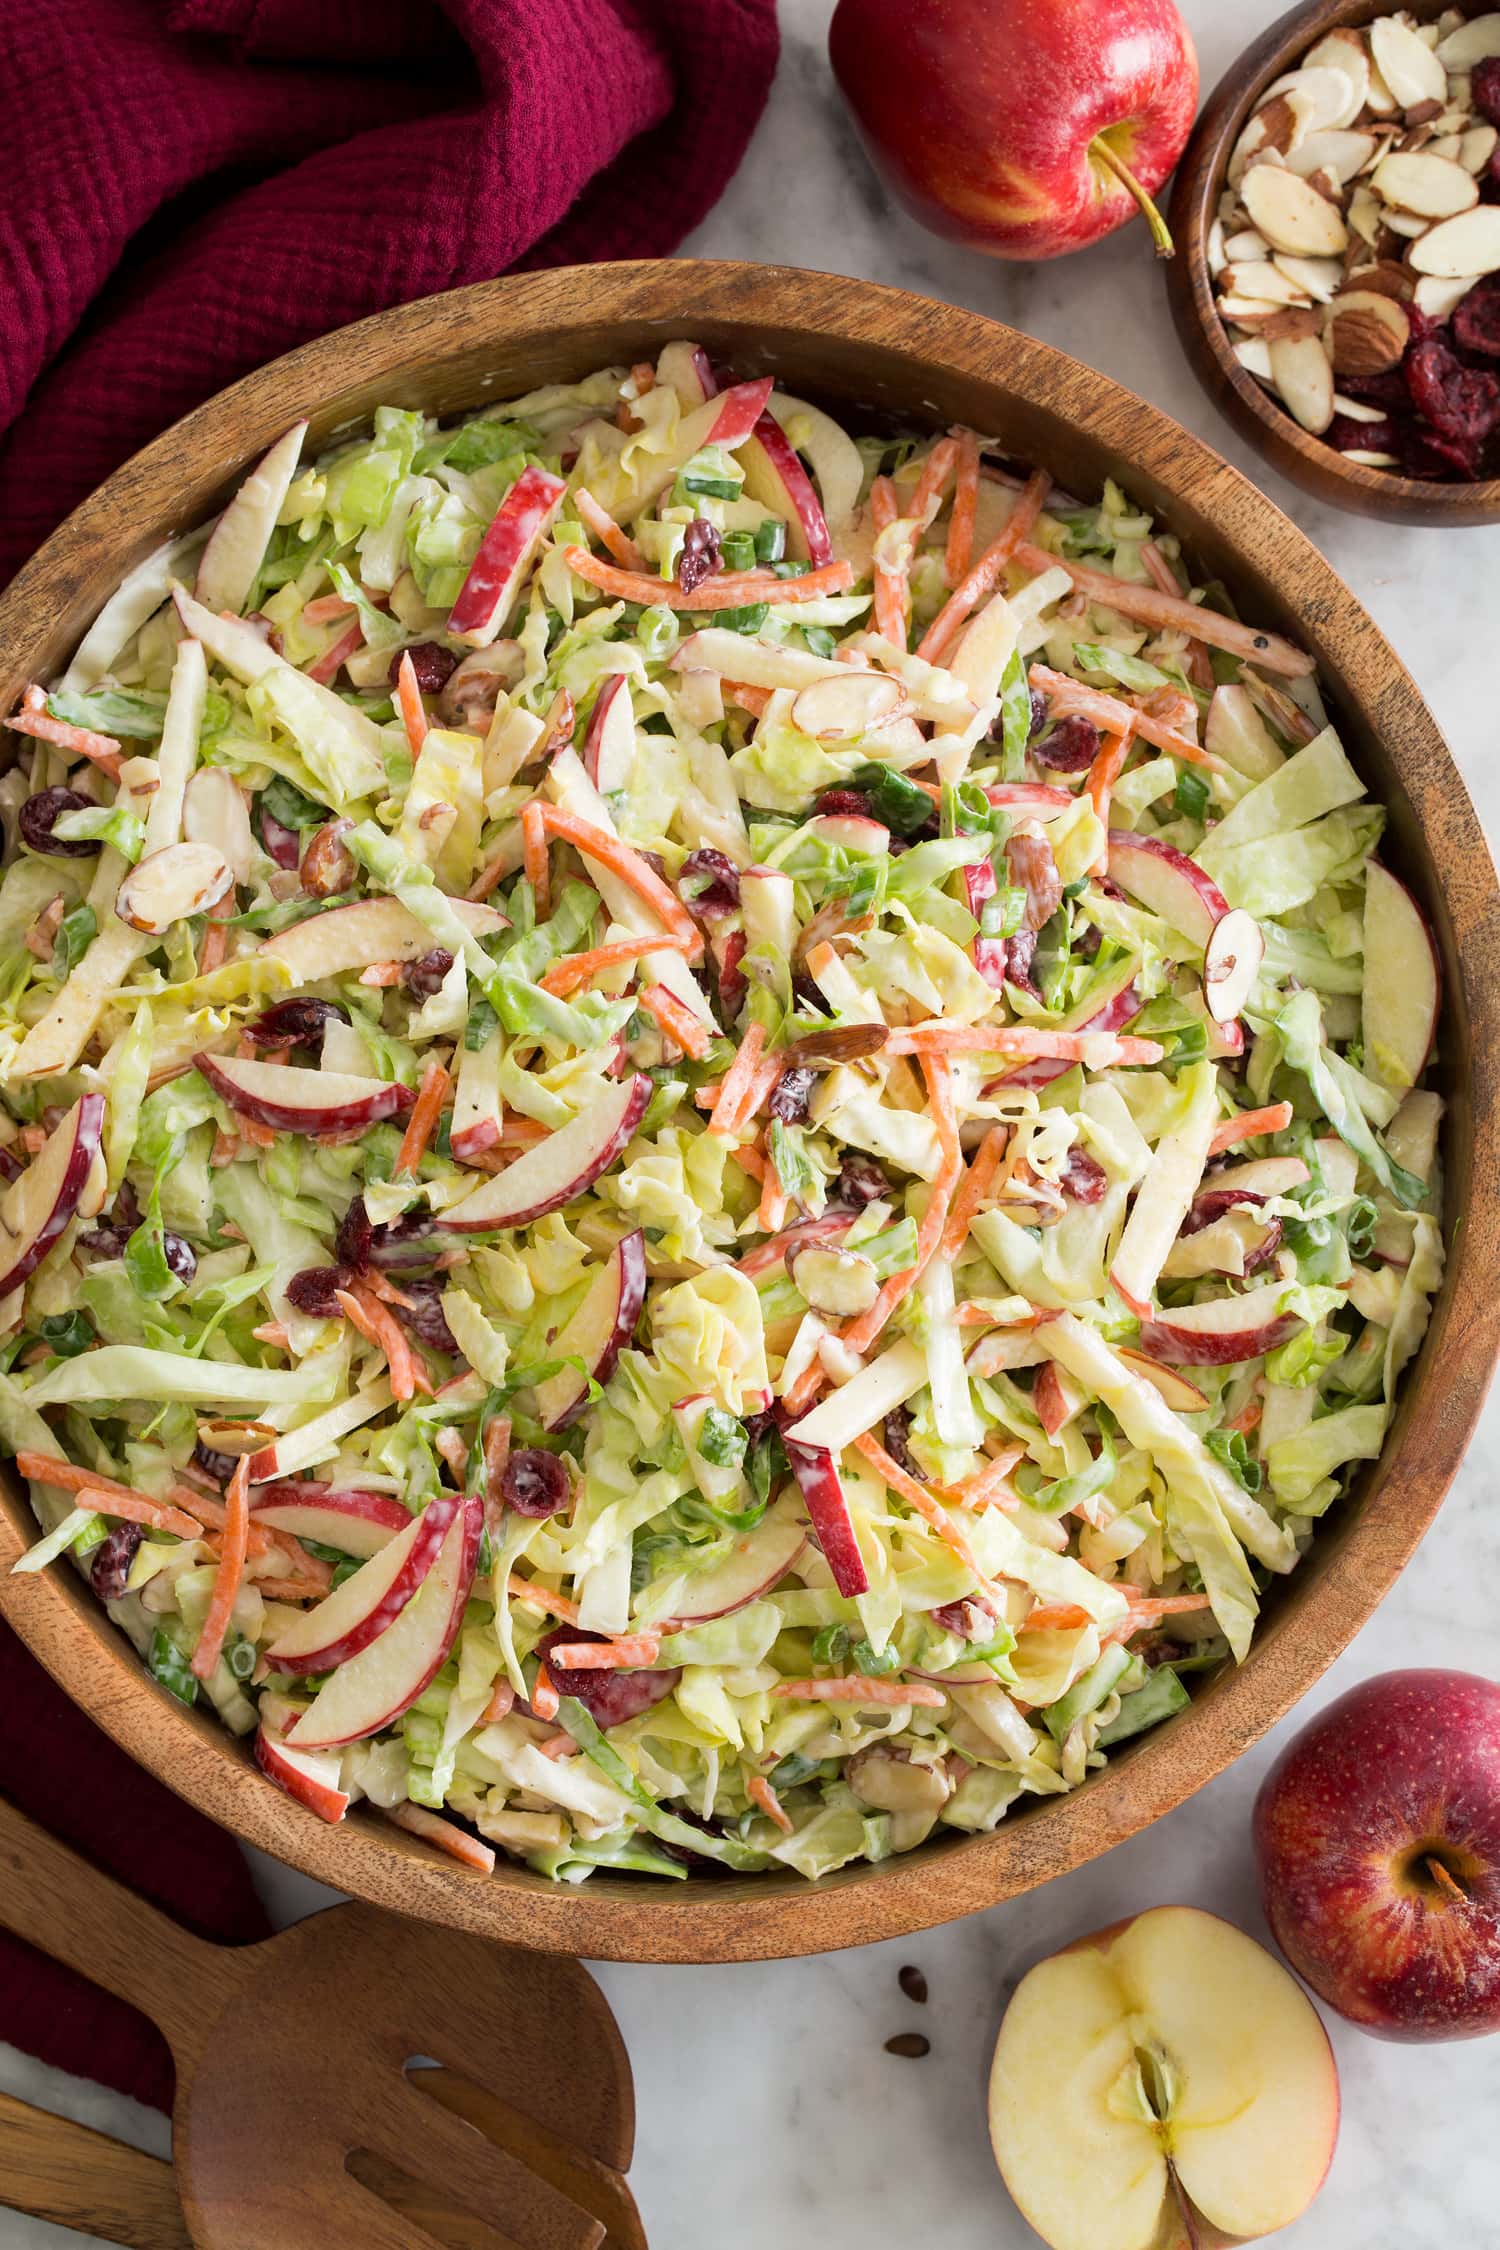 Overhead photo of coleslaw with apples.